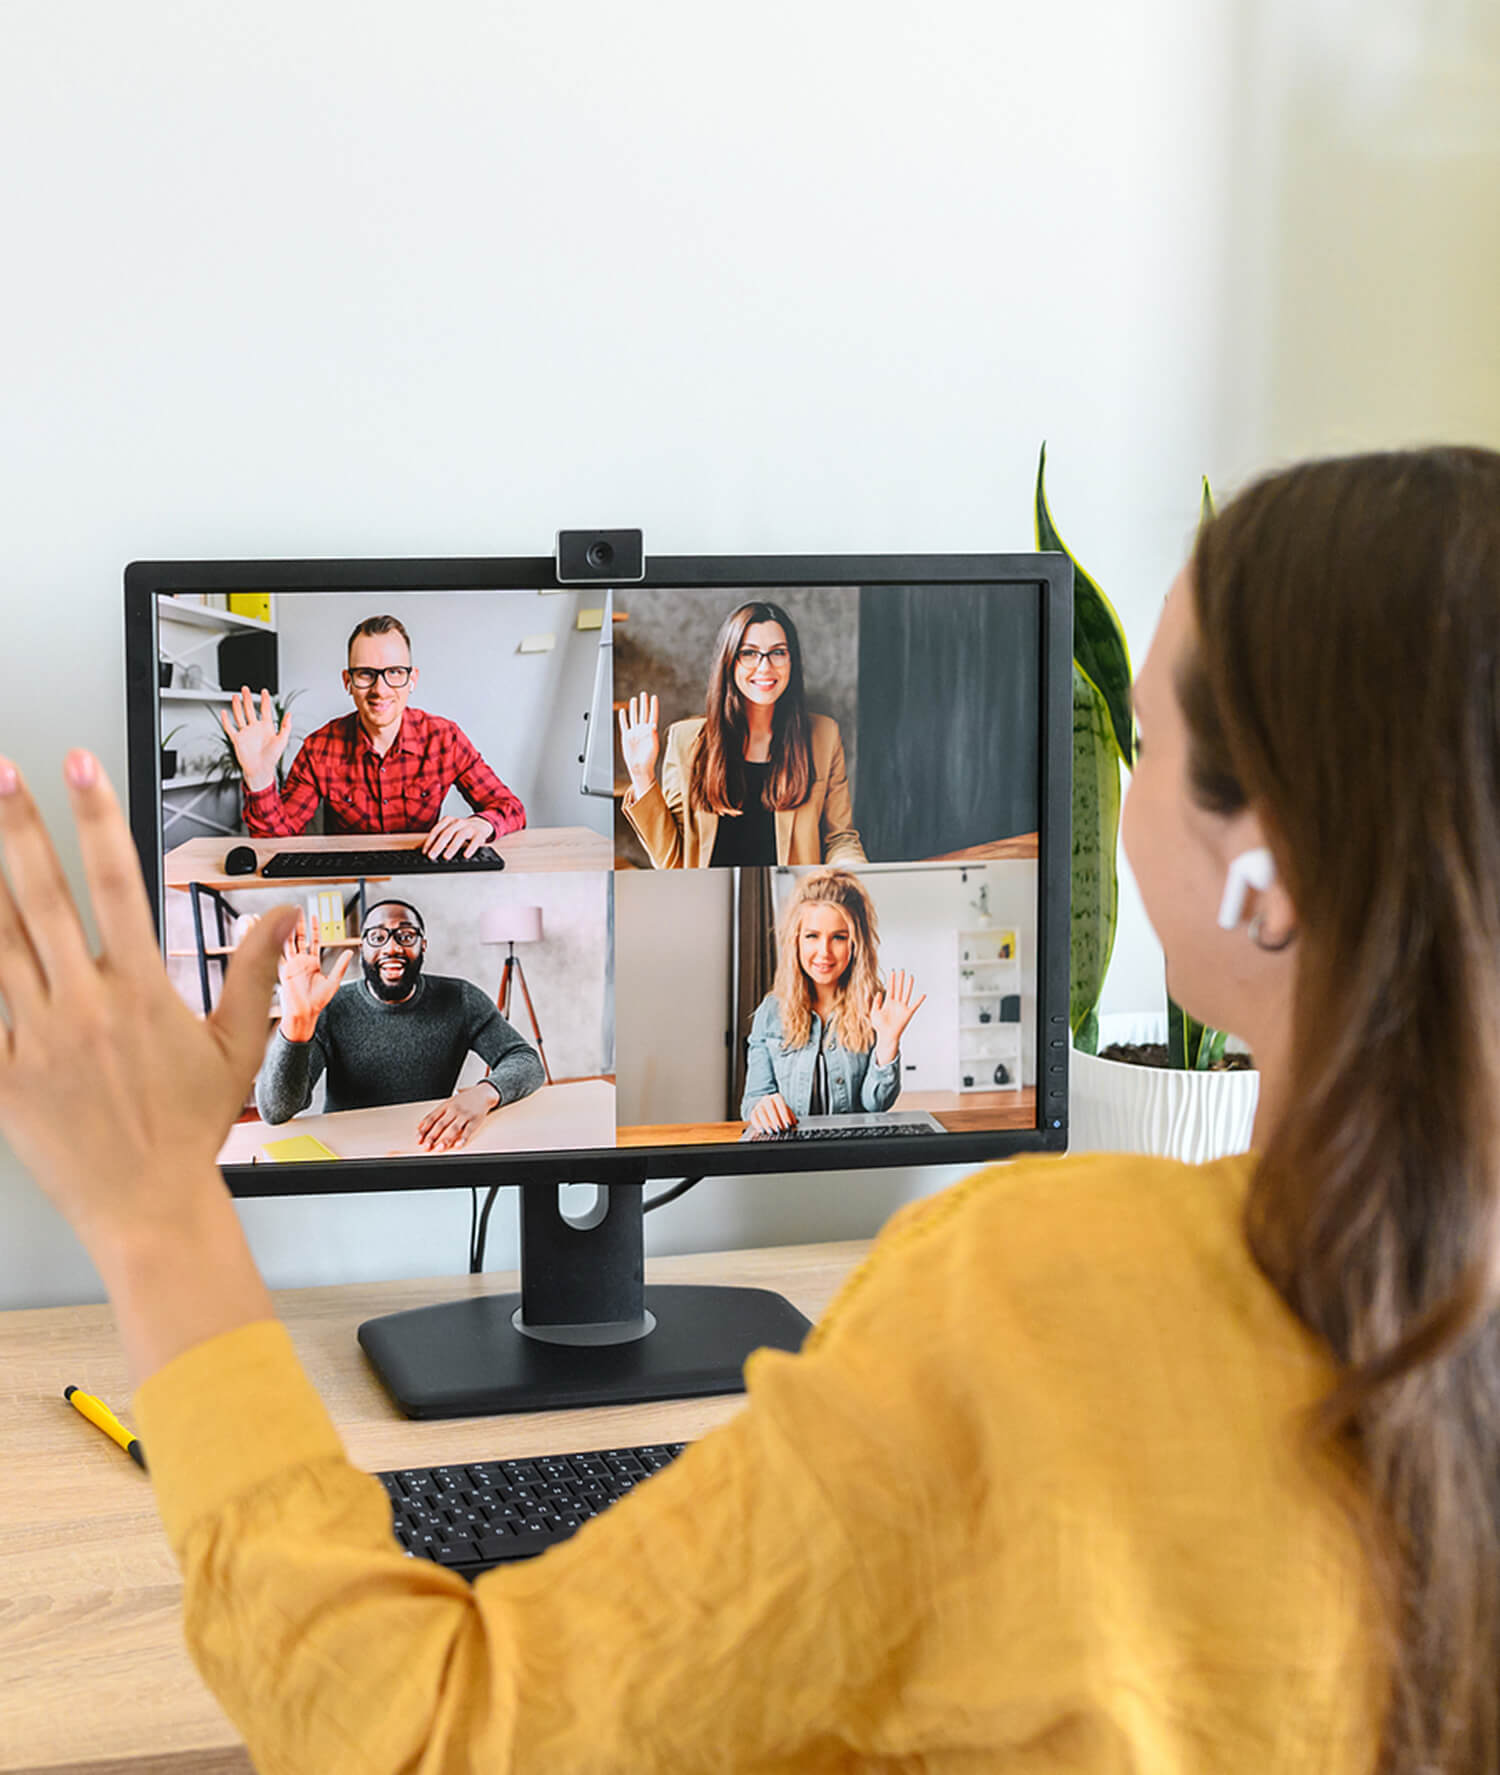 Image of a woman meeting with four people using a laptop and webcam. This image illustrates what online DBT therapy in California may look like. Reach out to an online DBT therapist in California by contacting us for online therapy. | 90274 | 90275